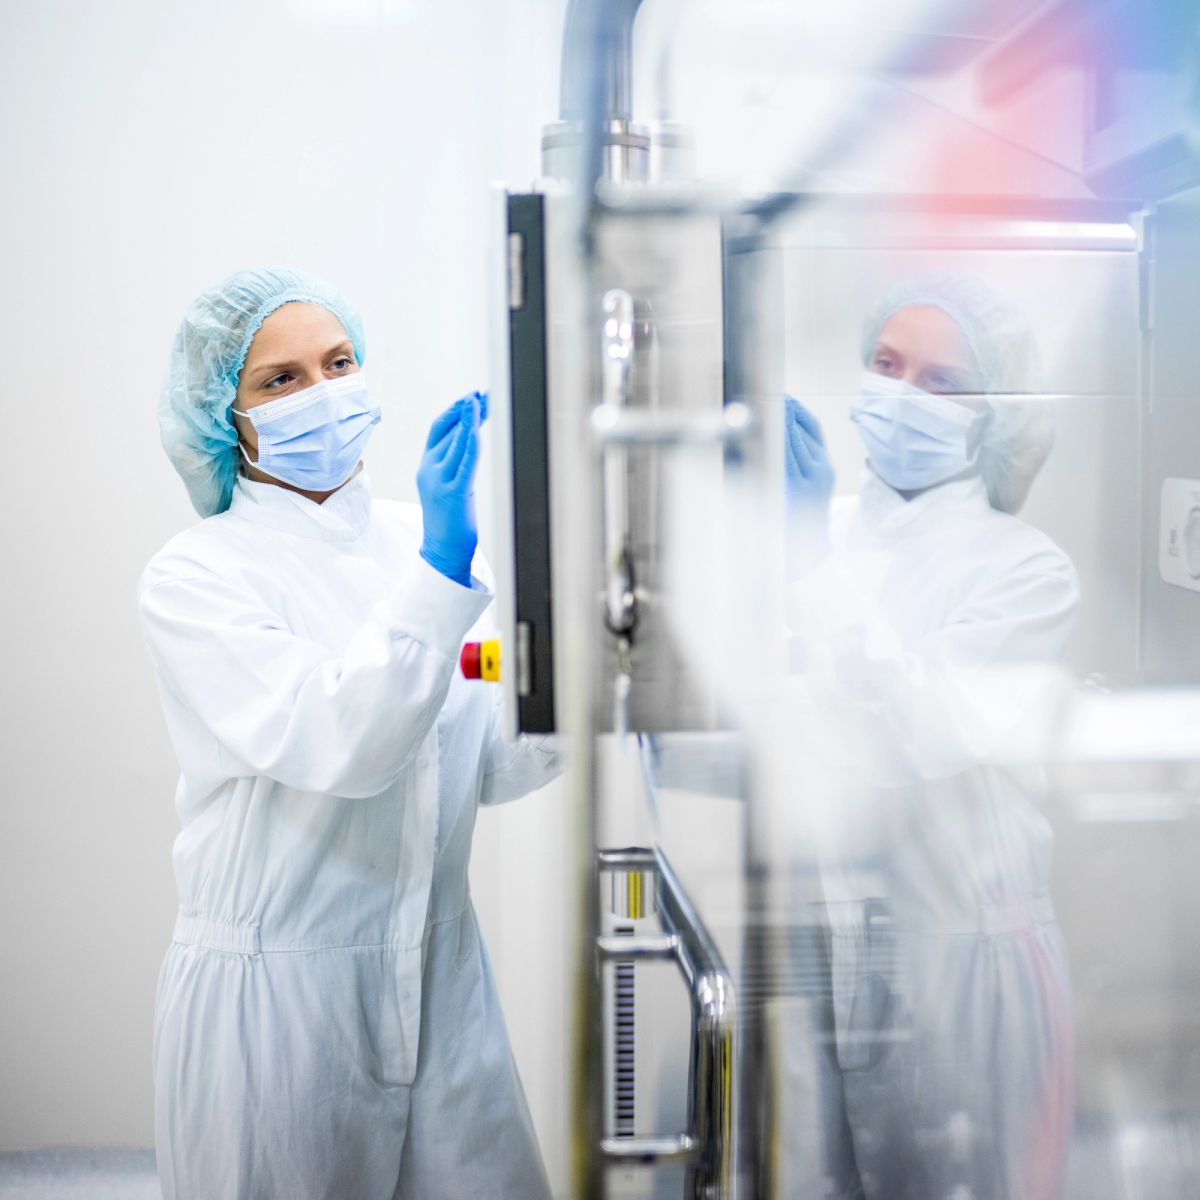 6 Steps to Energy Optimisation in Pharmaceutical Manufacturing